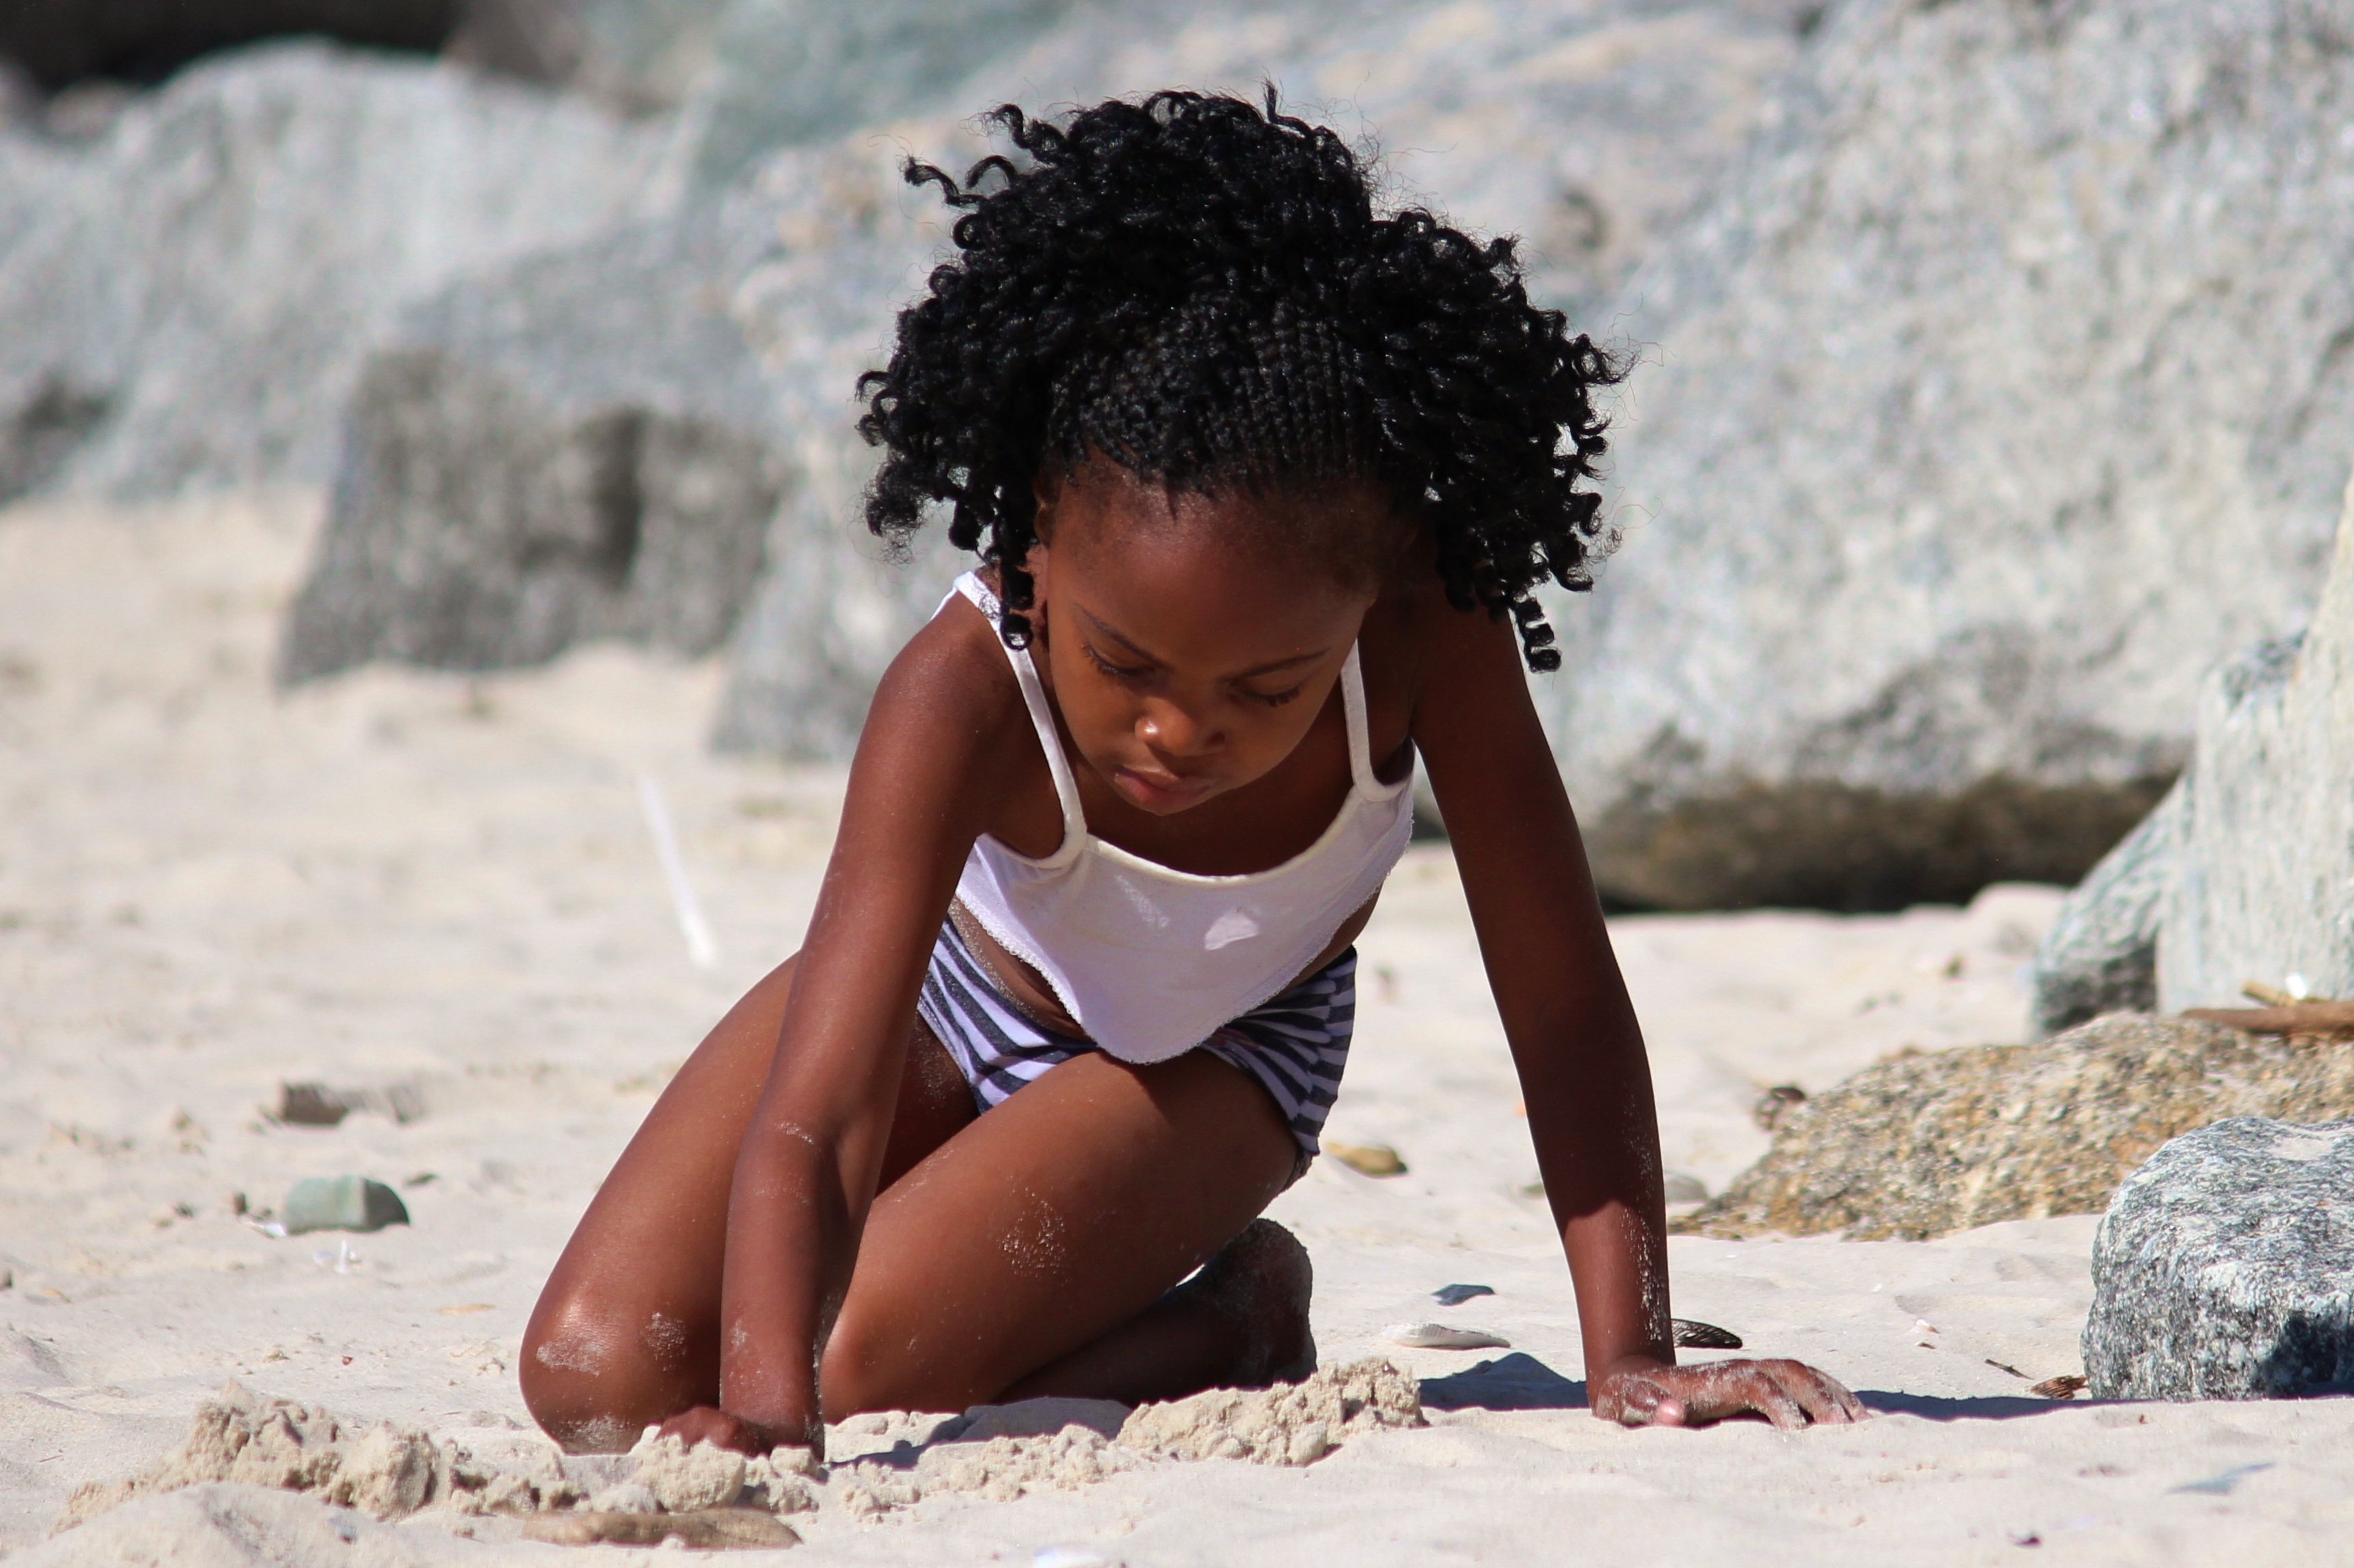 Black girl playing with sand in South Africa